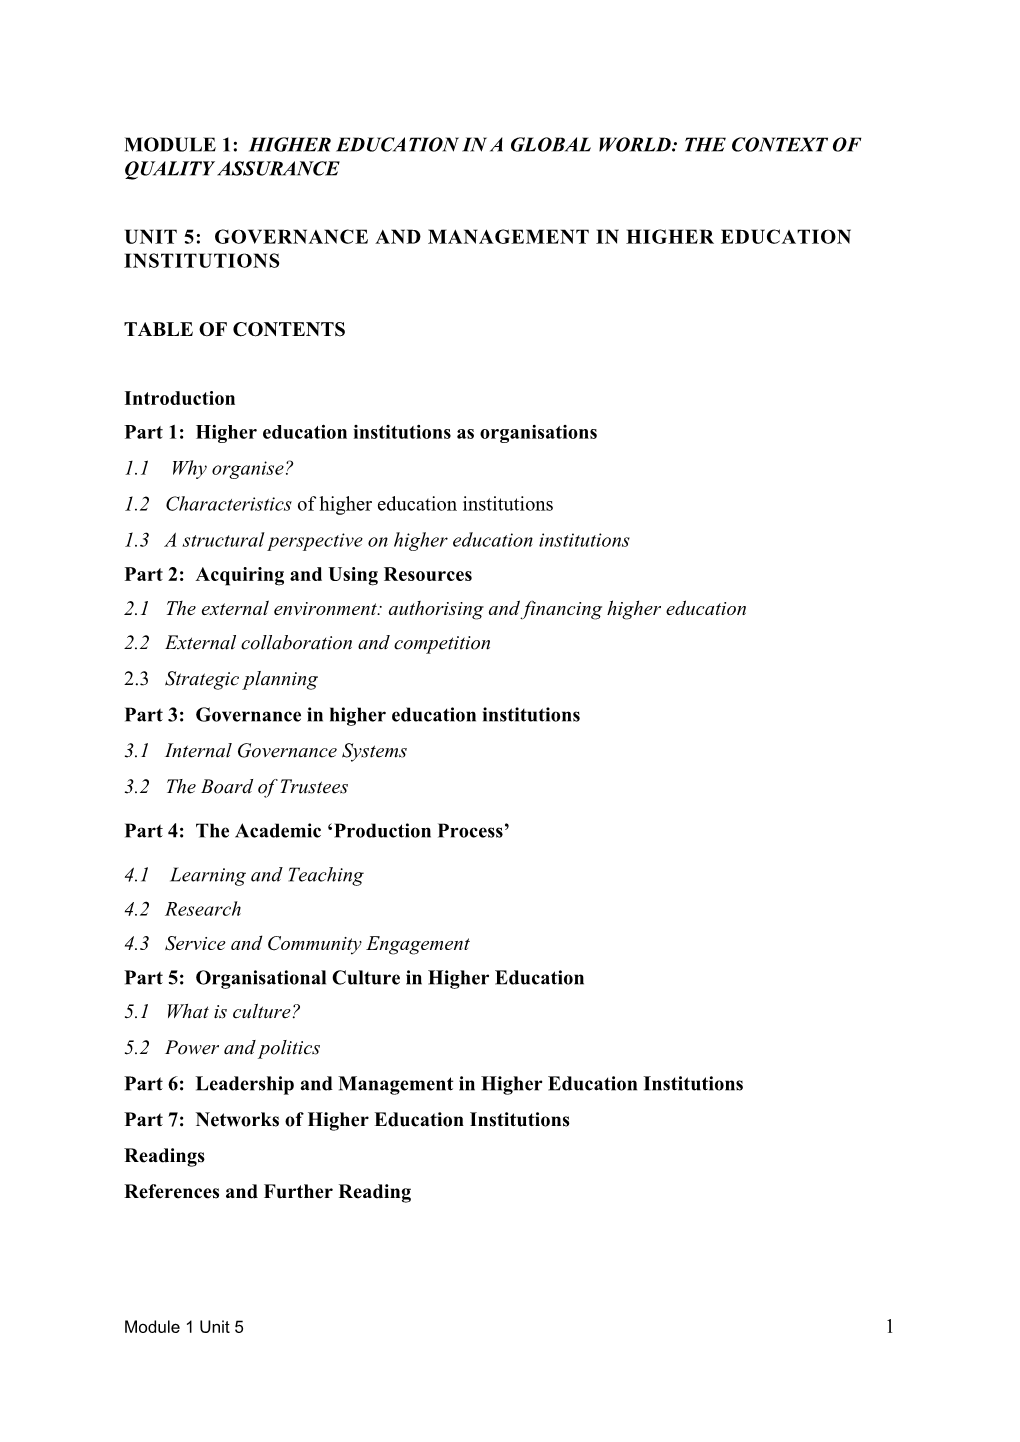 Unit 3: Governance and Management of Higher Education Institutions